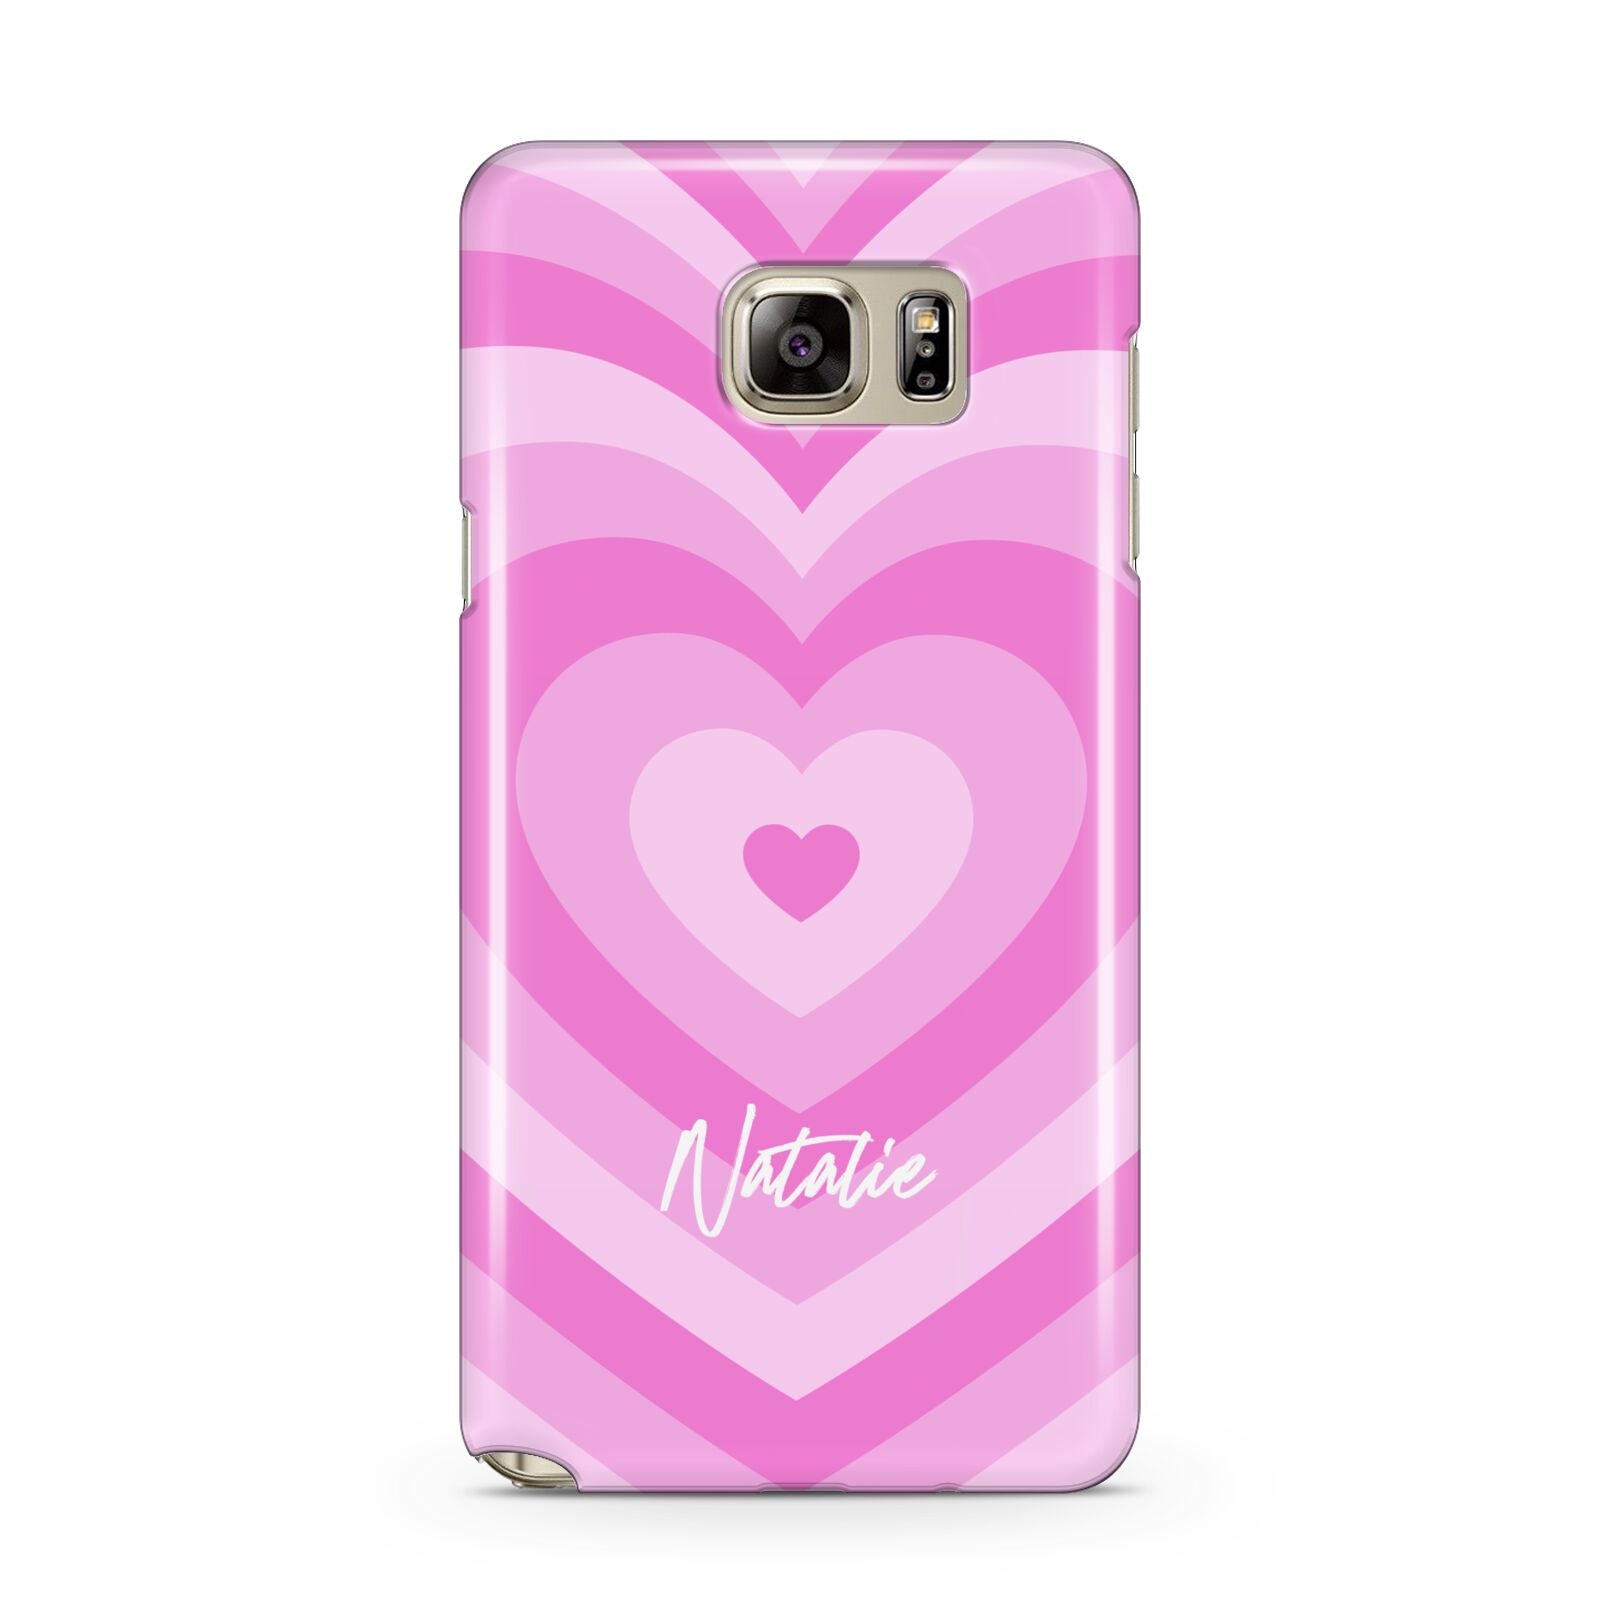 Personalised Pink Heart Samsung Galaxy Note 5 Case